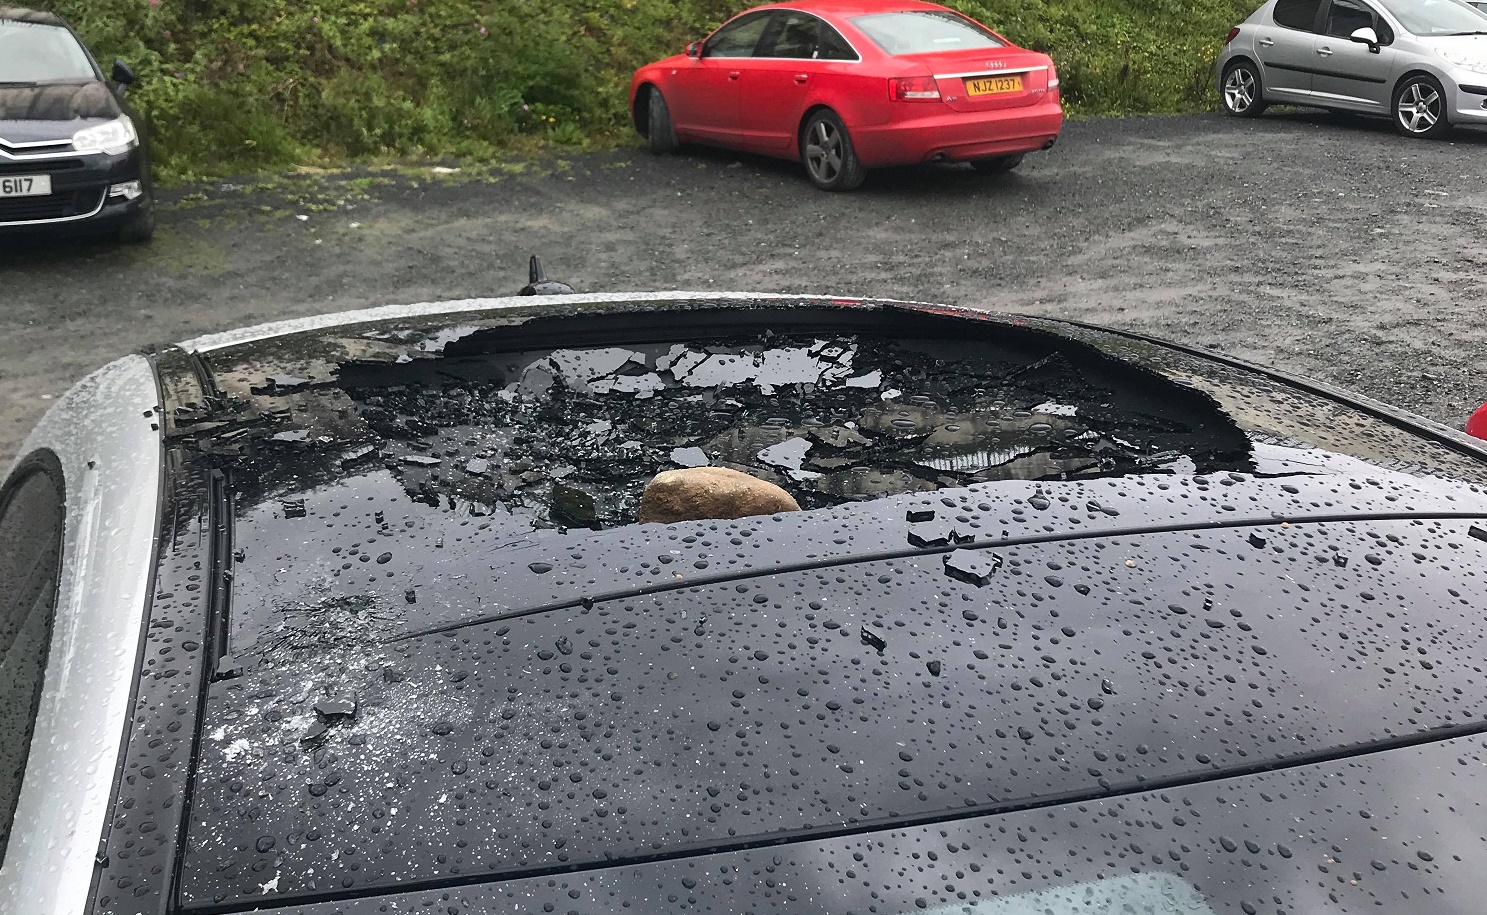 Newry car vandalised in North Street Car Park in Newry's city centre - Newry news